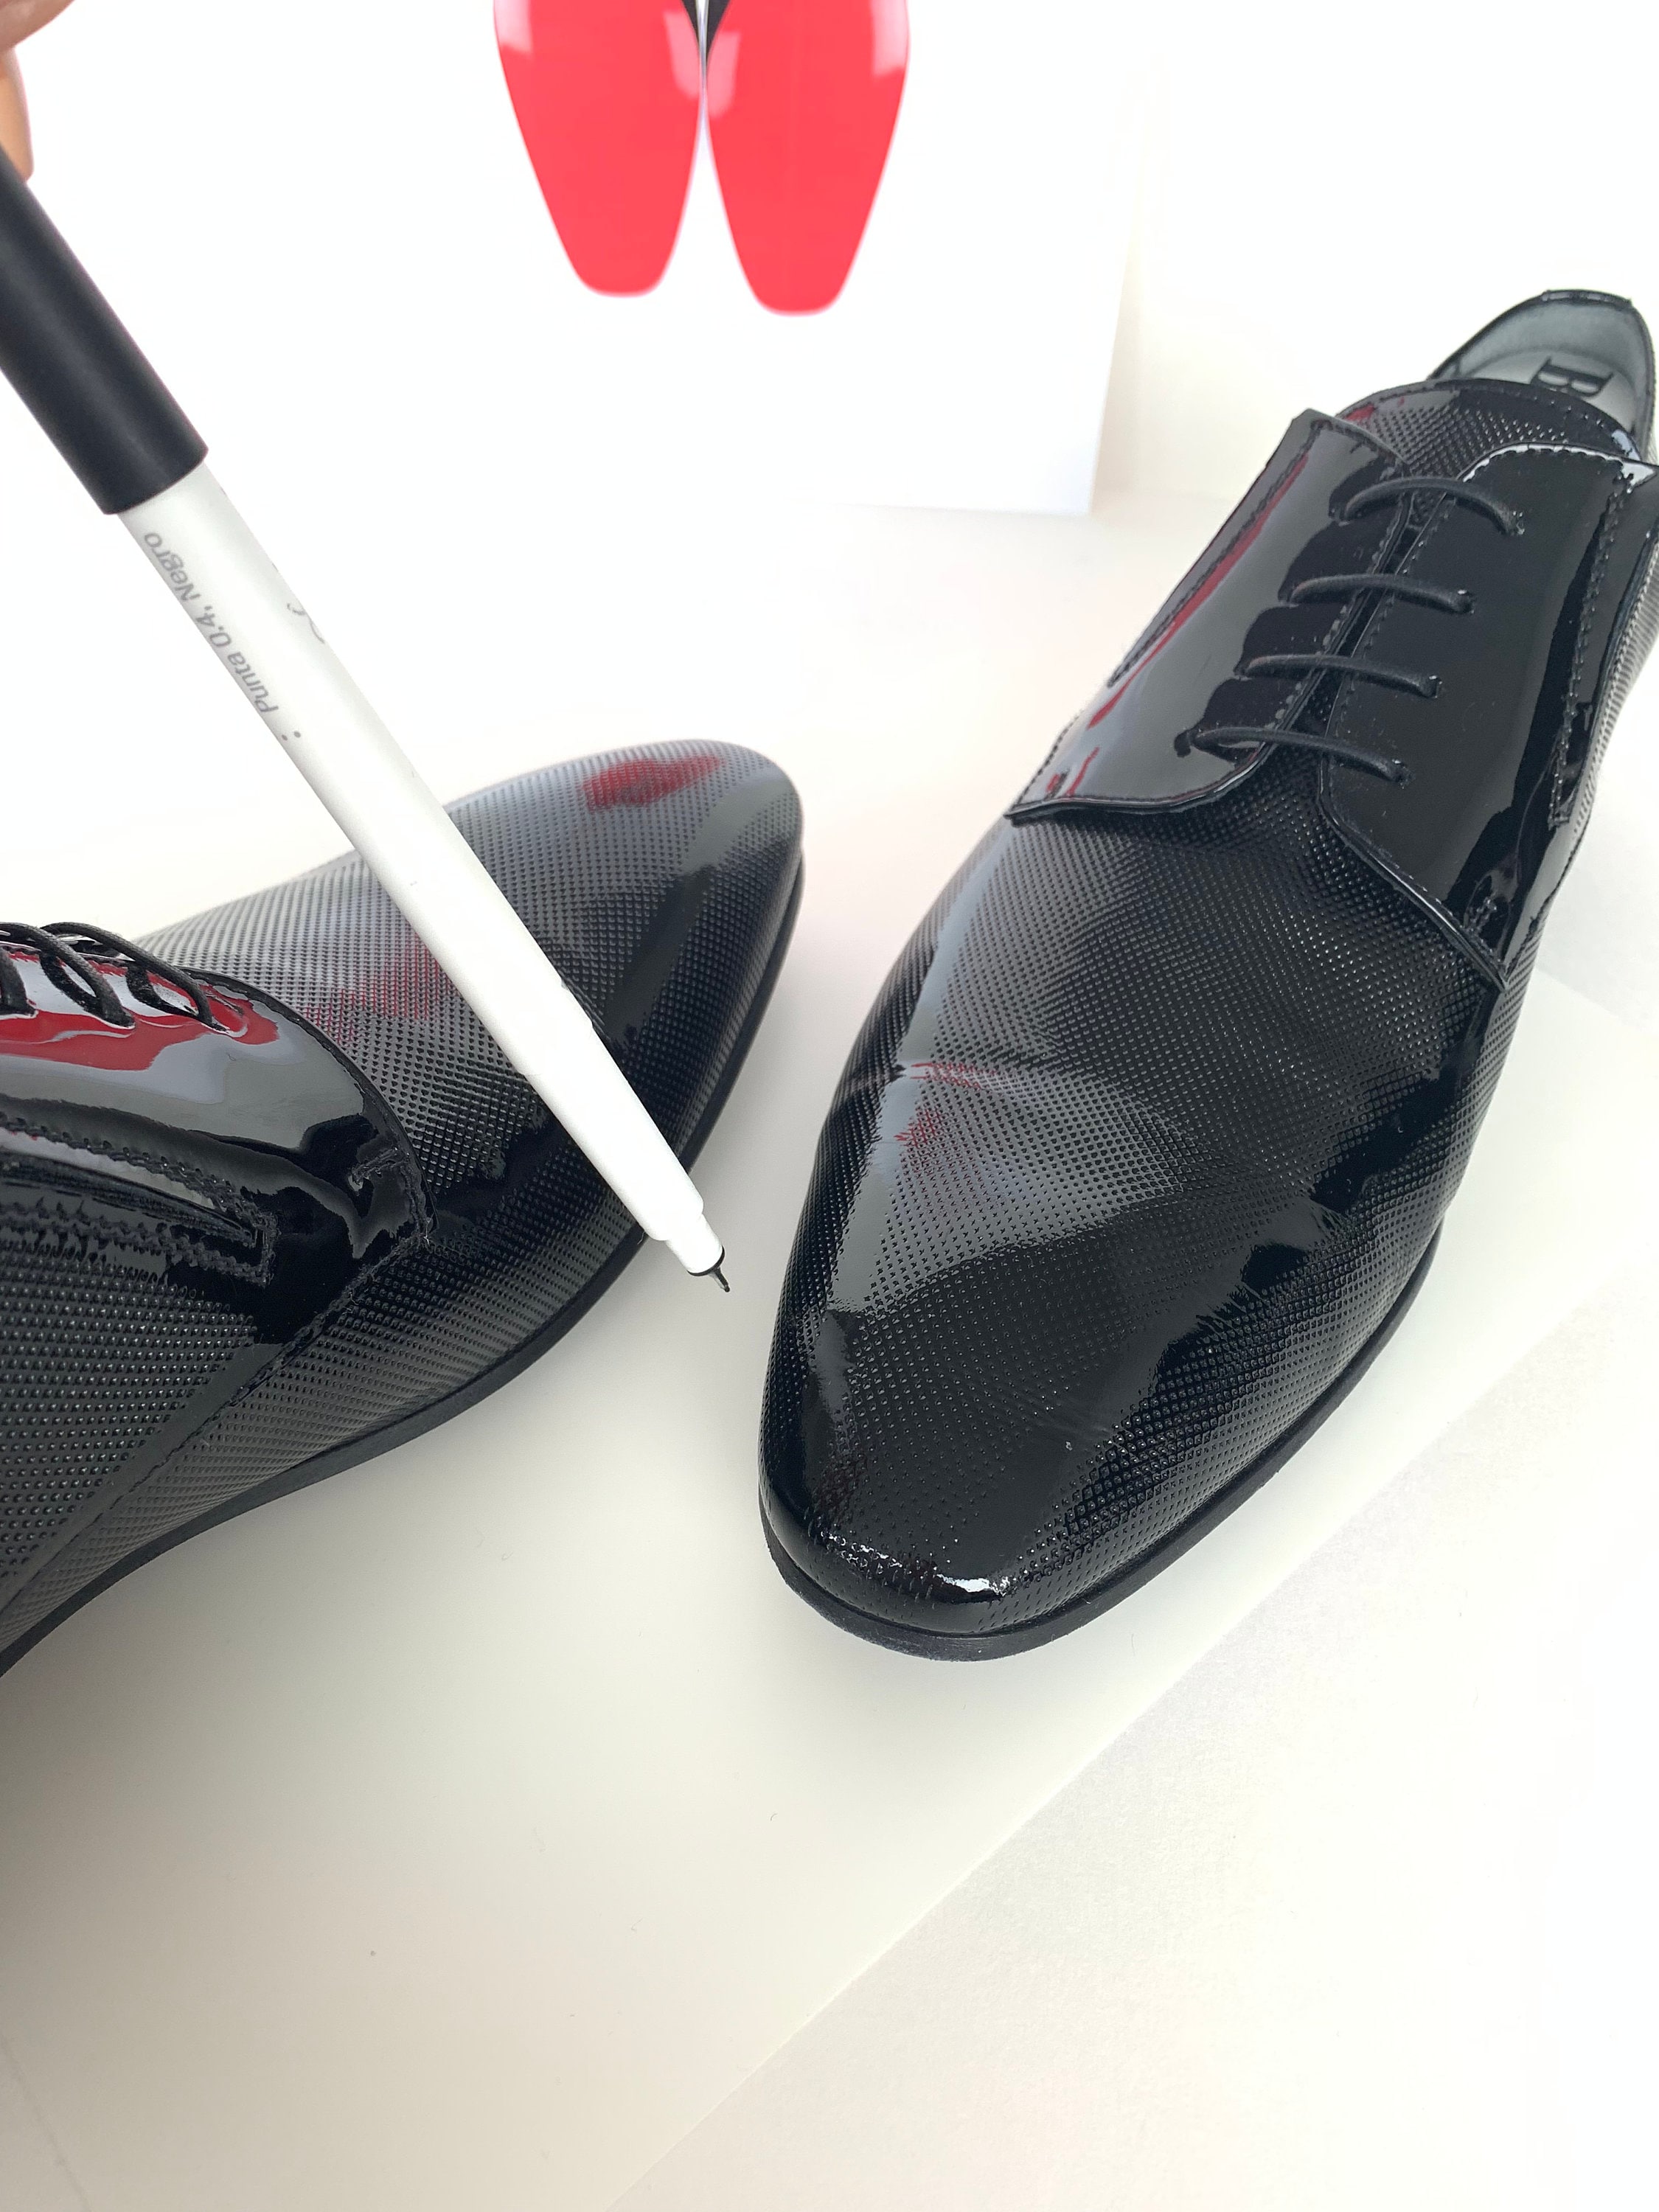 Men's Crystal Clear Red Bottom Sole Protector for Designer Louboutin Soles